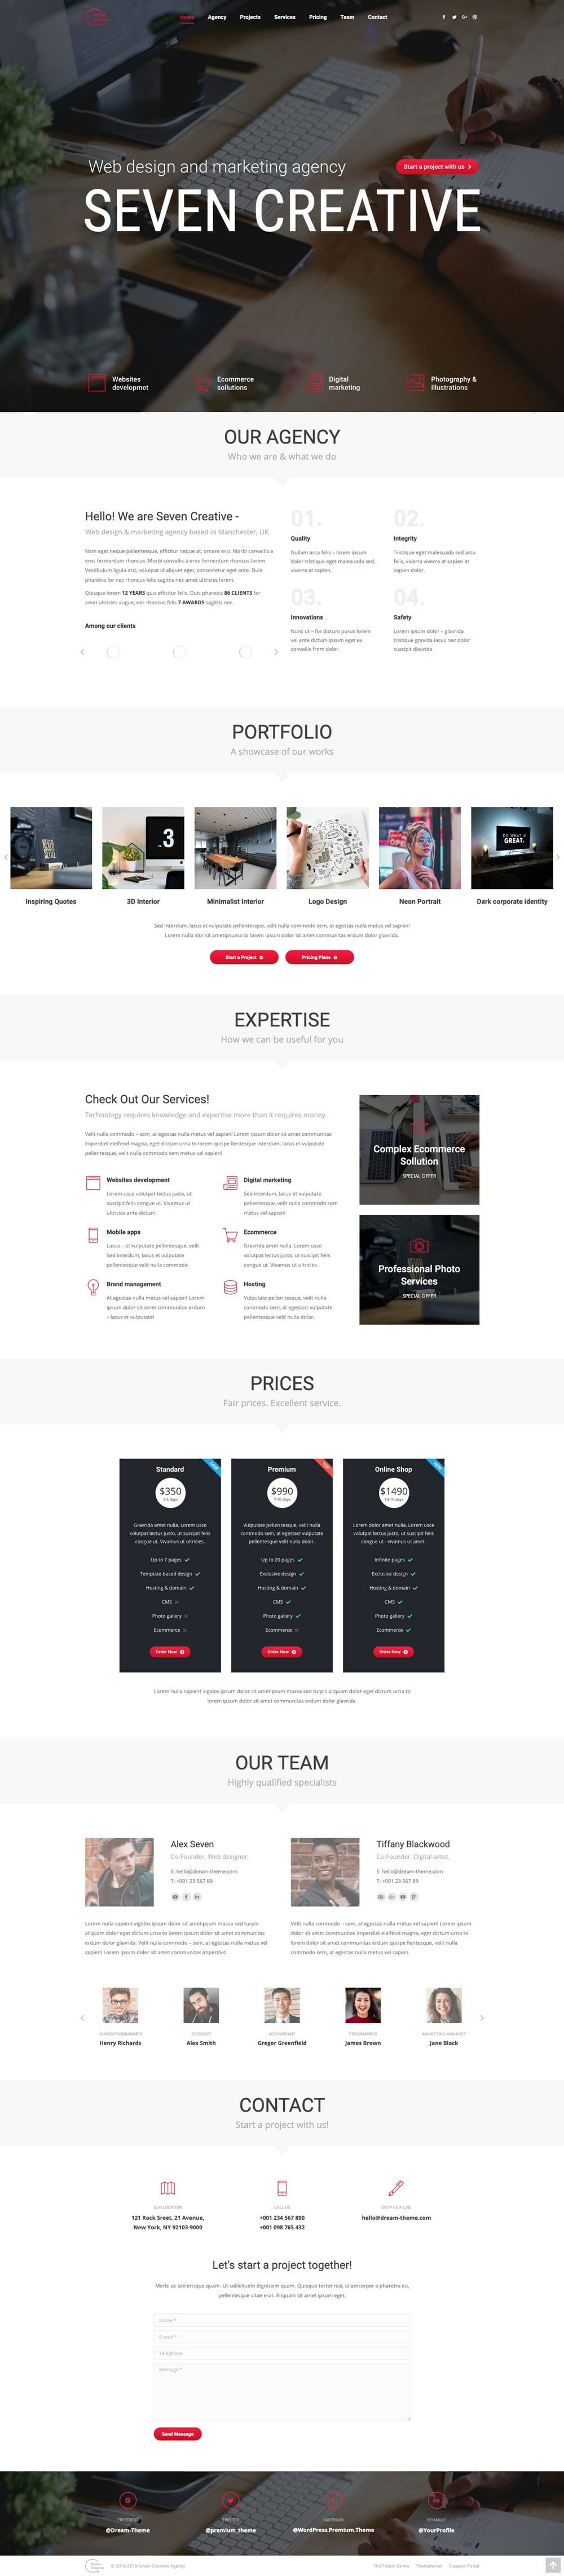 onepage-personal-template-sample-design2